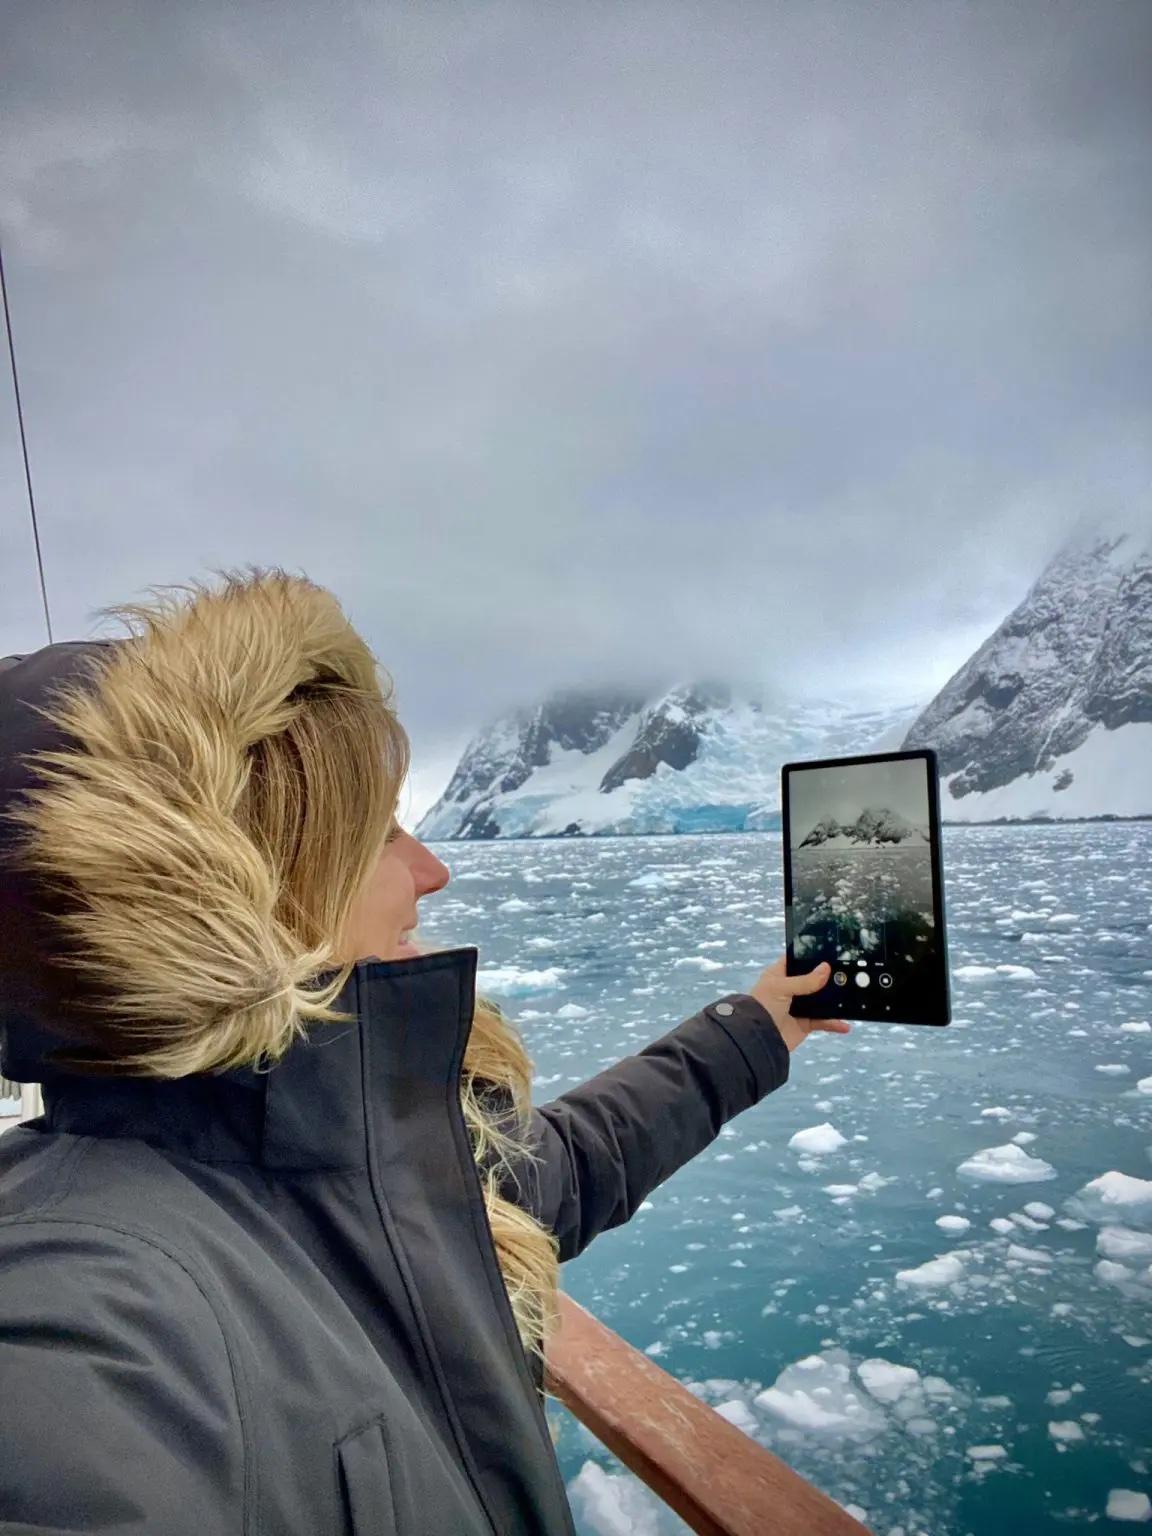 Gádor in a parka, viewing icy water through a tablet screen